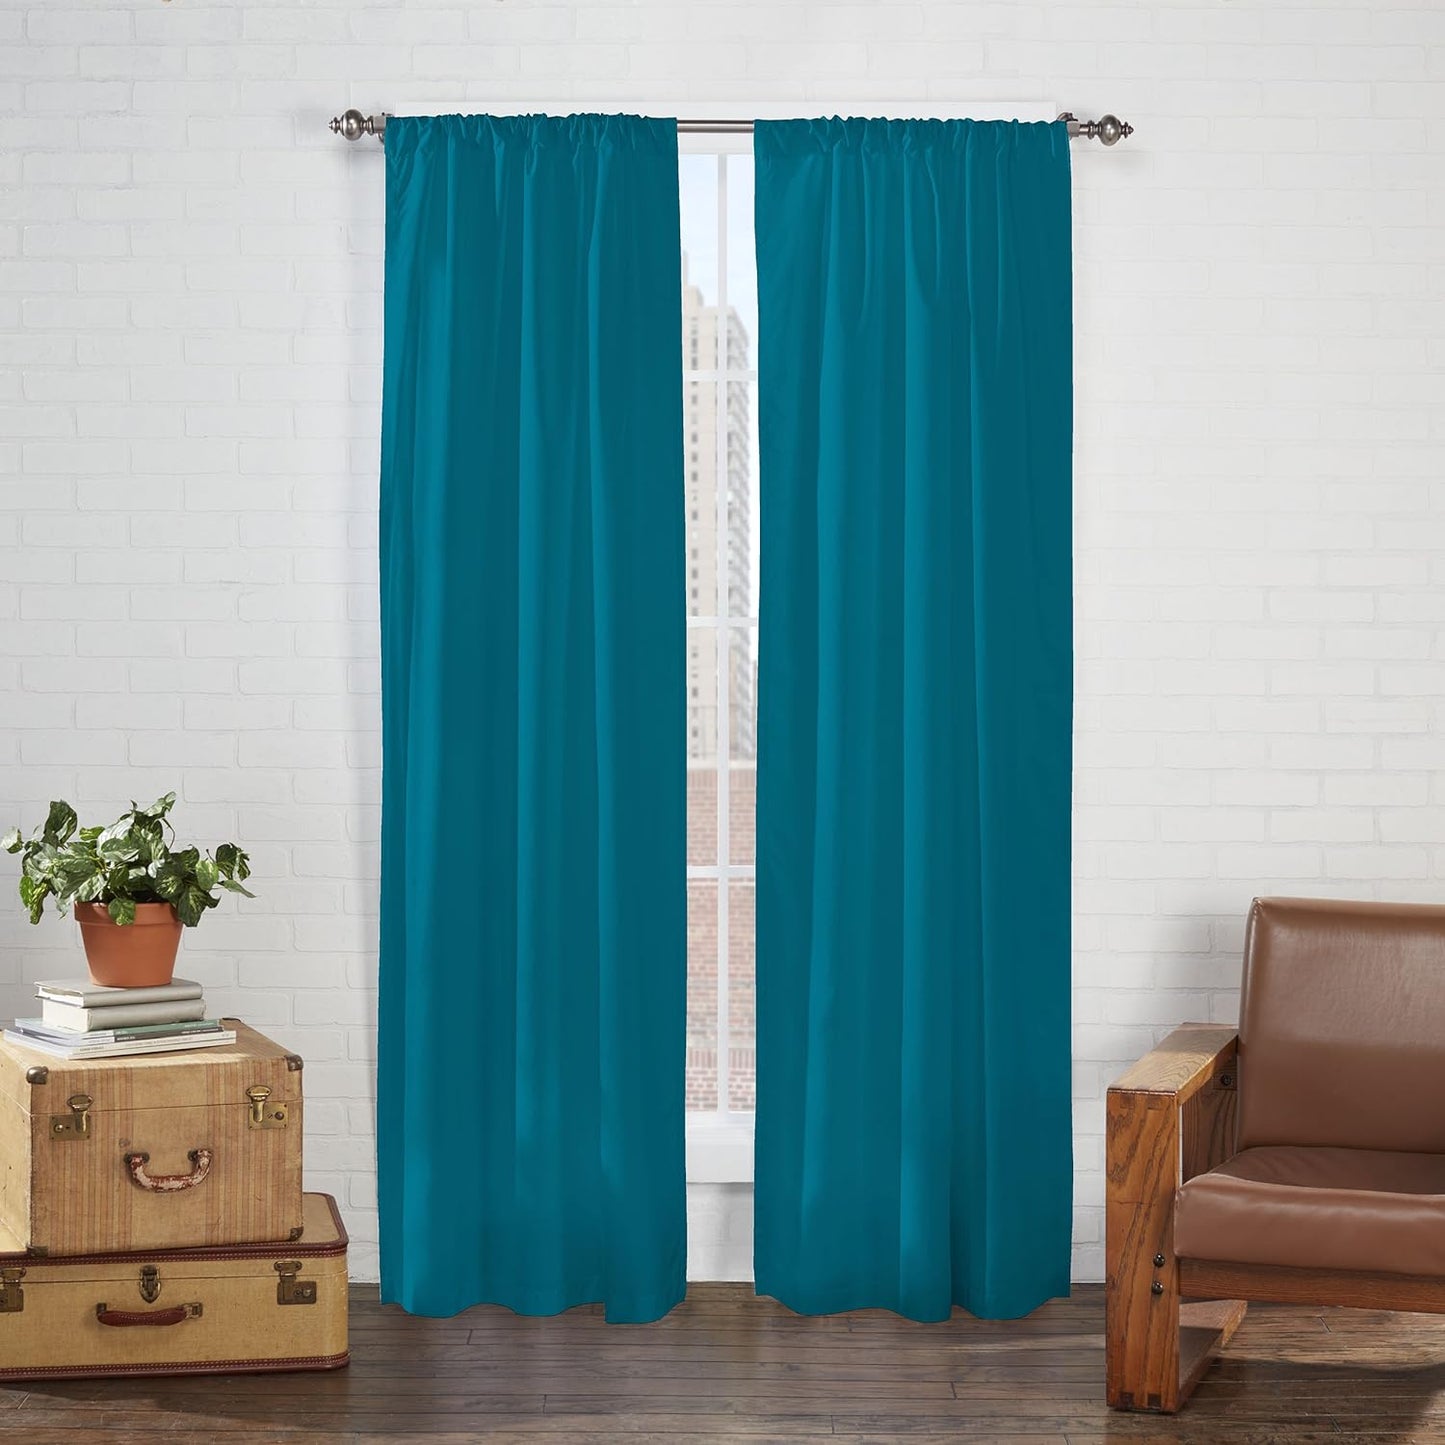 Pairs to Go Cadenza Modern Decorative Rod Pocket Window Curtains for Living Room (2 Panels), 40 in X 84 In, Teal  Keeco LLC Teal 40 In X 54 In 